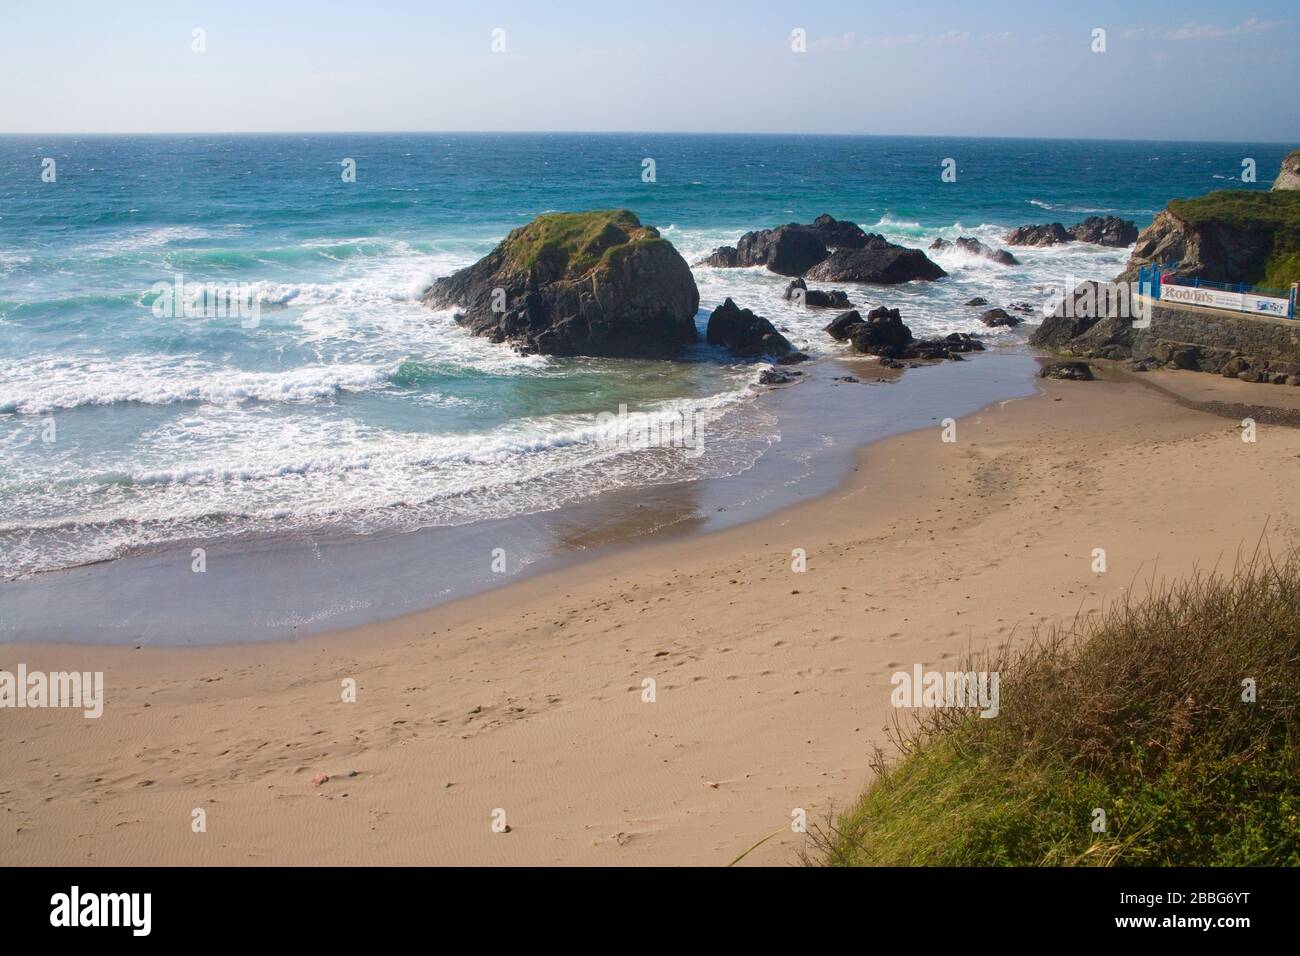 the fine beach at kennack sands on the lizard in south cornwall Stock Photo